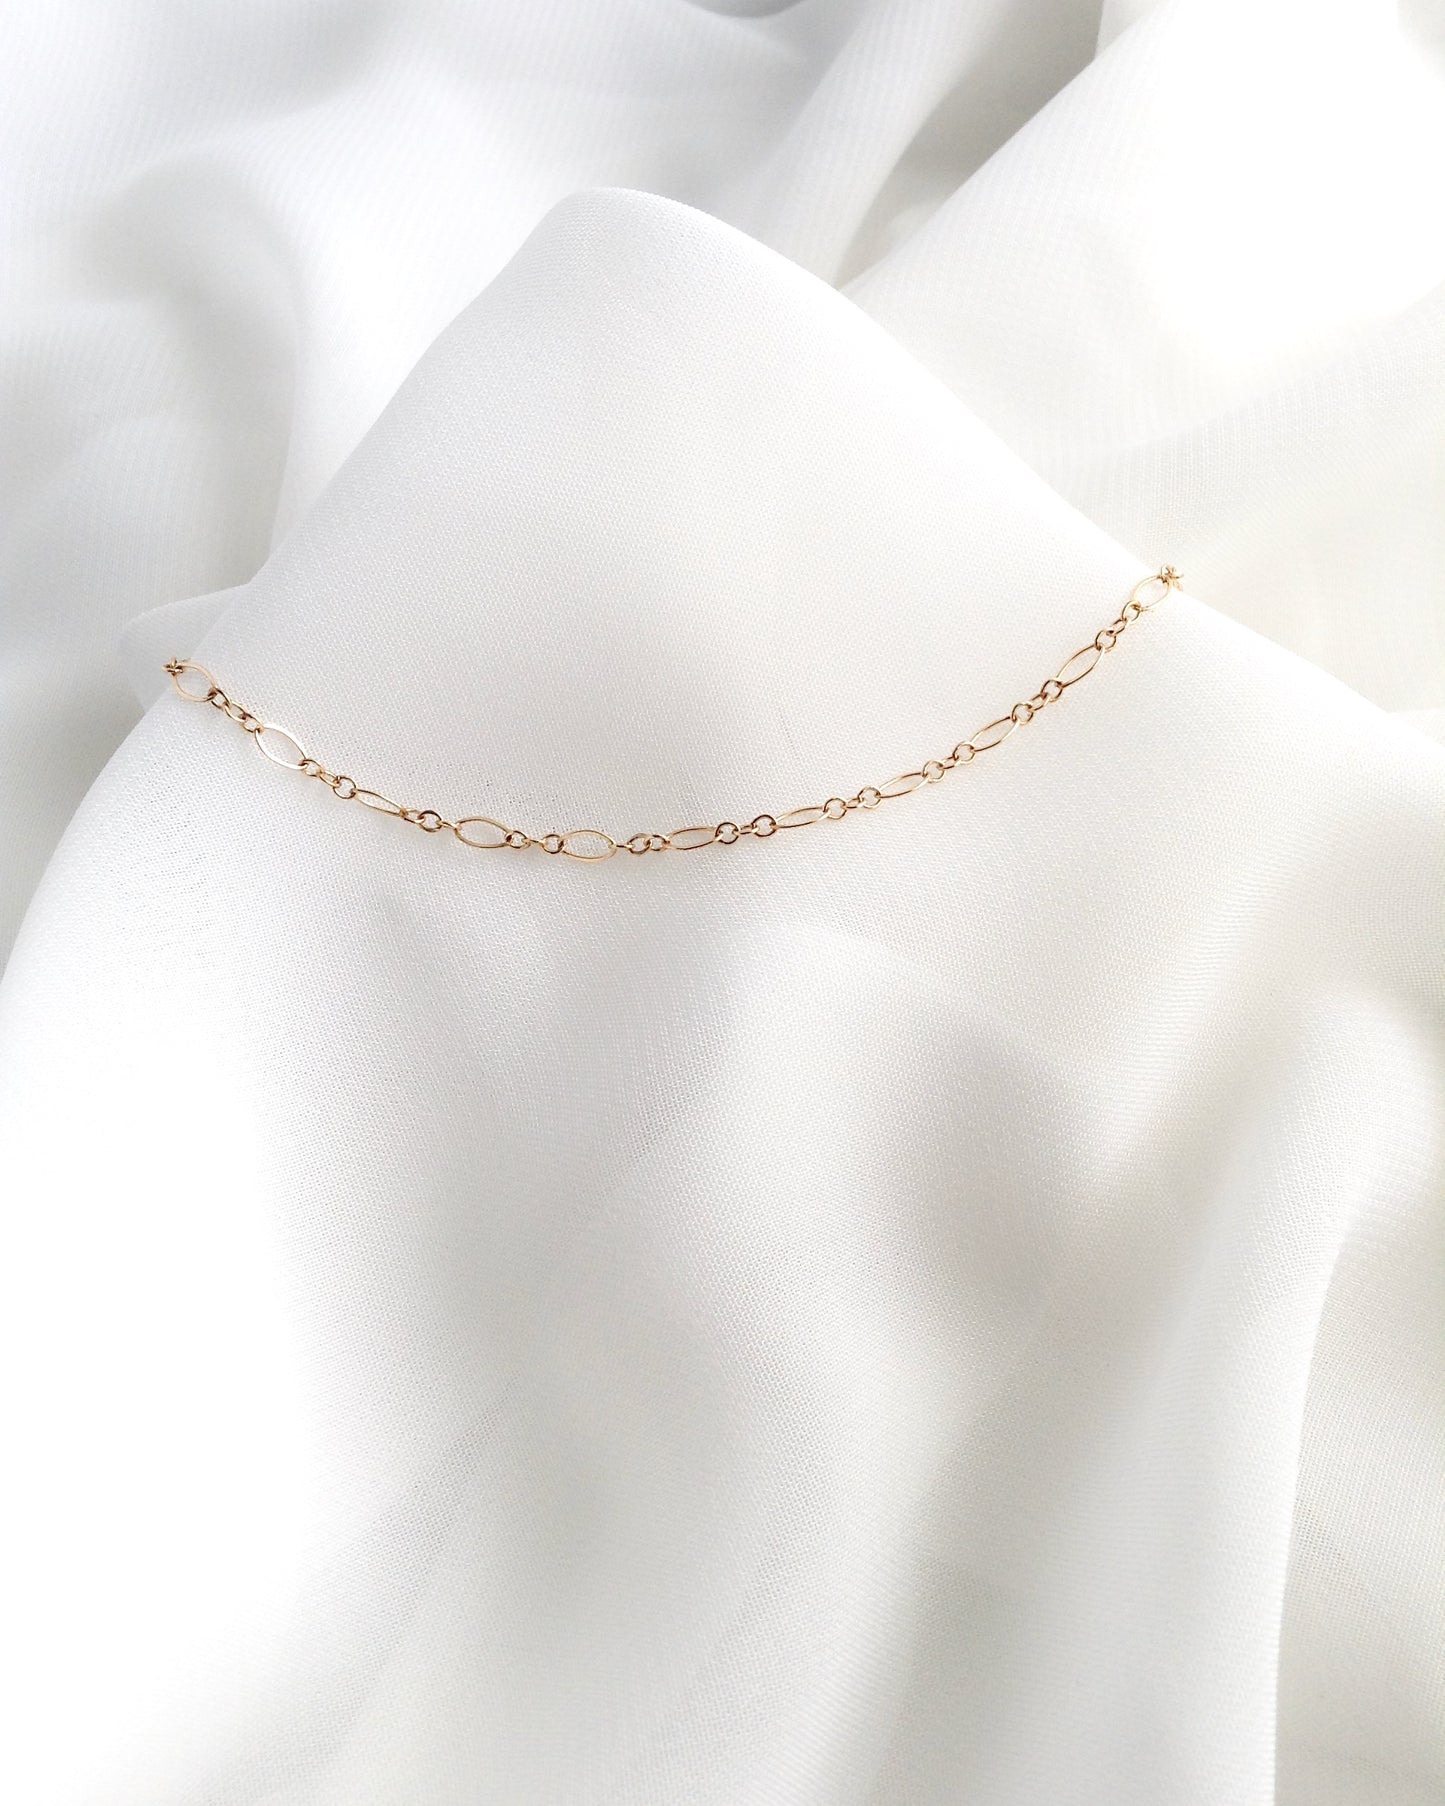 Delicate Minimalist Anklet | Dainty Gold Anklet | Elegant Chain Anklet | IB Jewelry